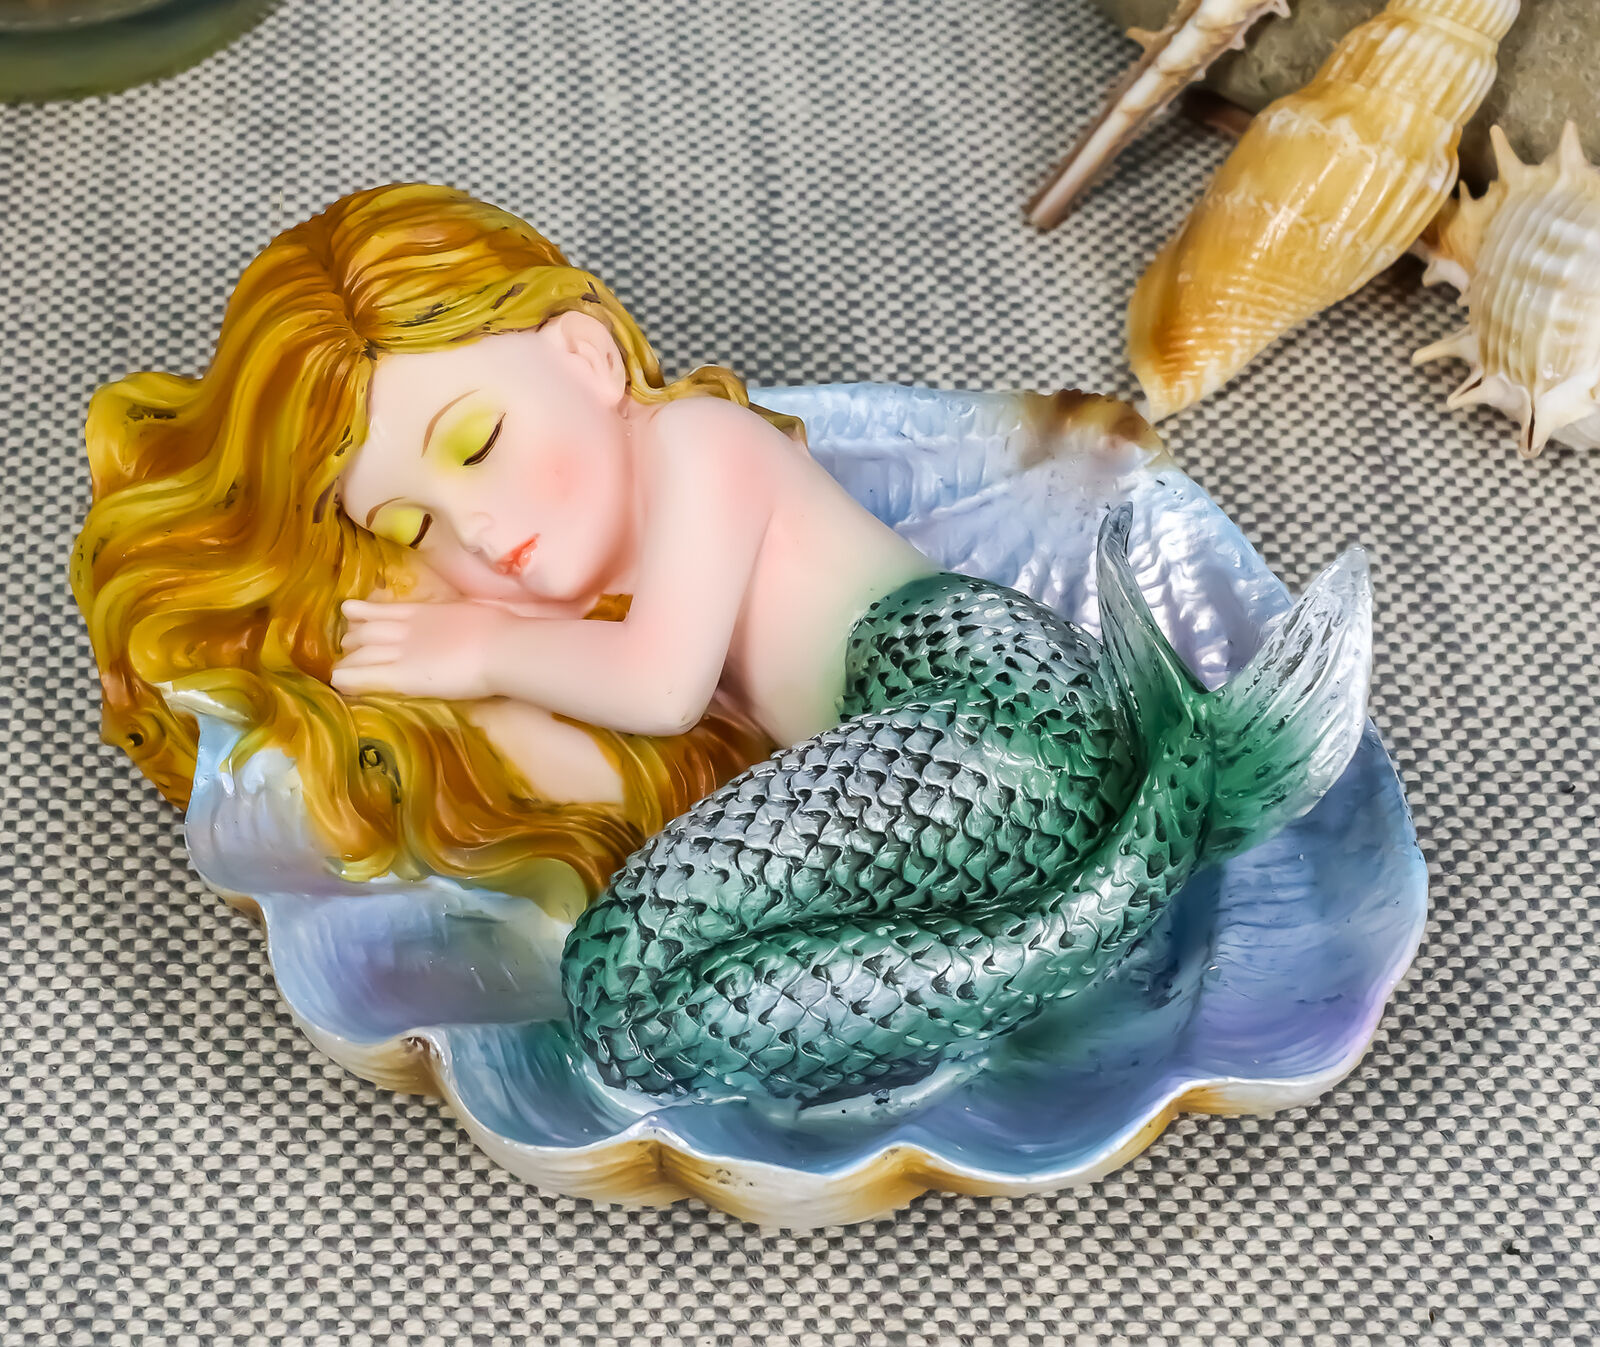 Under The Sea Baby Mermaid Sleeping On Oyster Shell Enchansia Figurine Sculpture